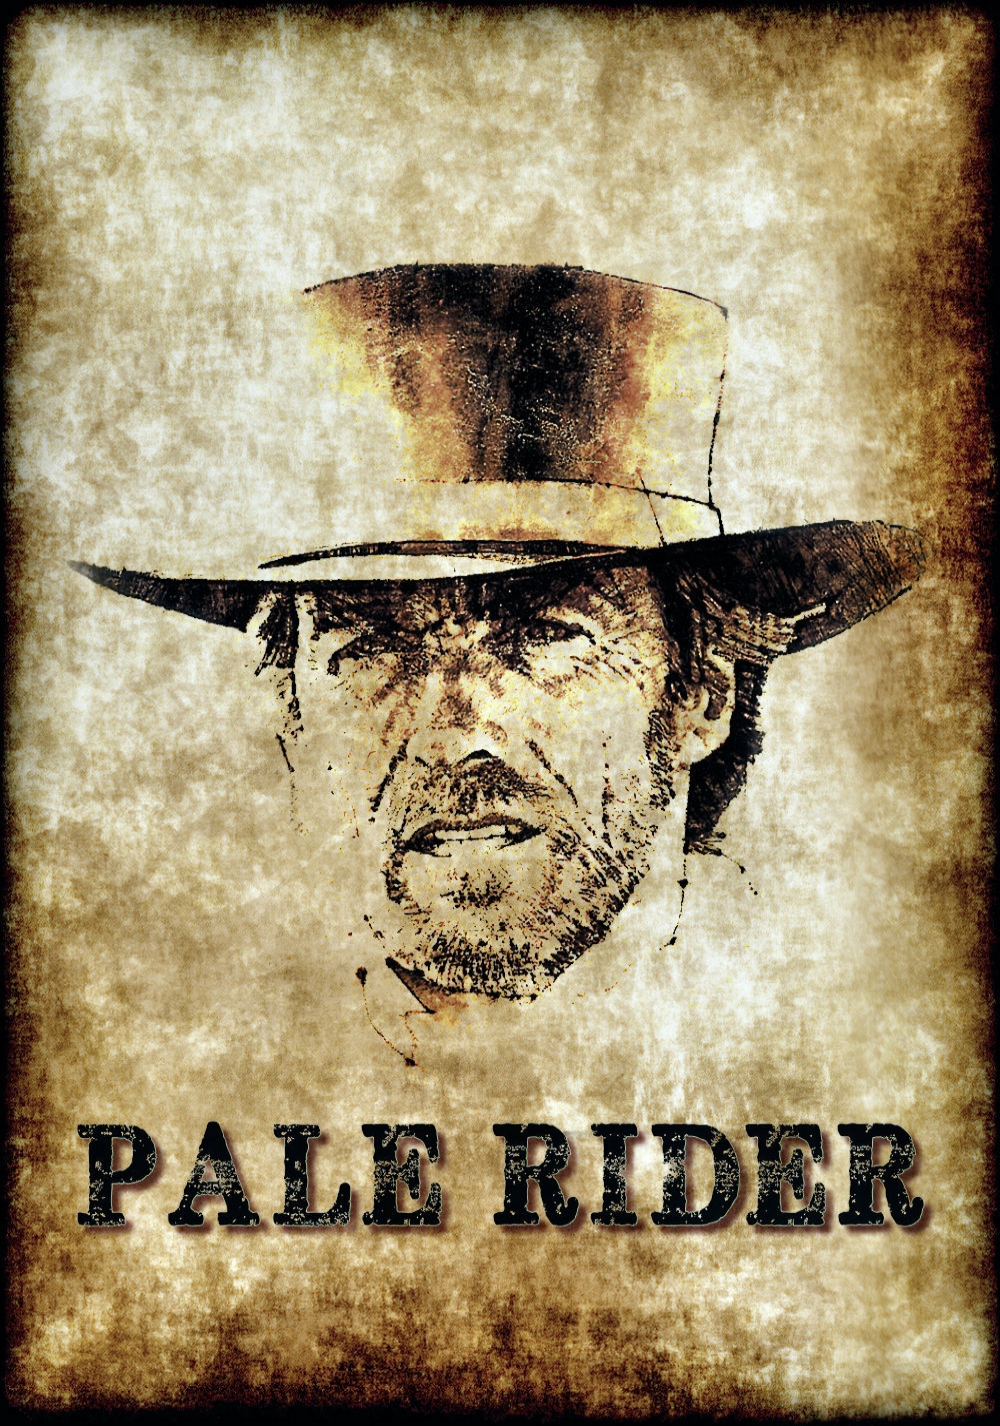 Pale Rider Images. 